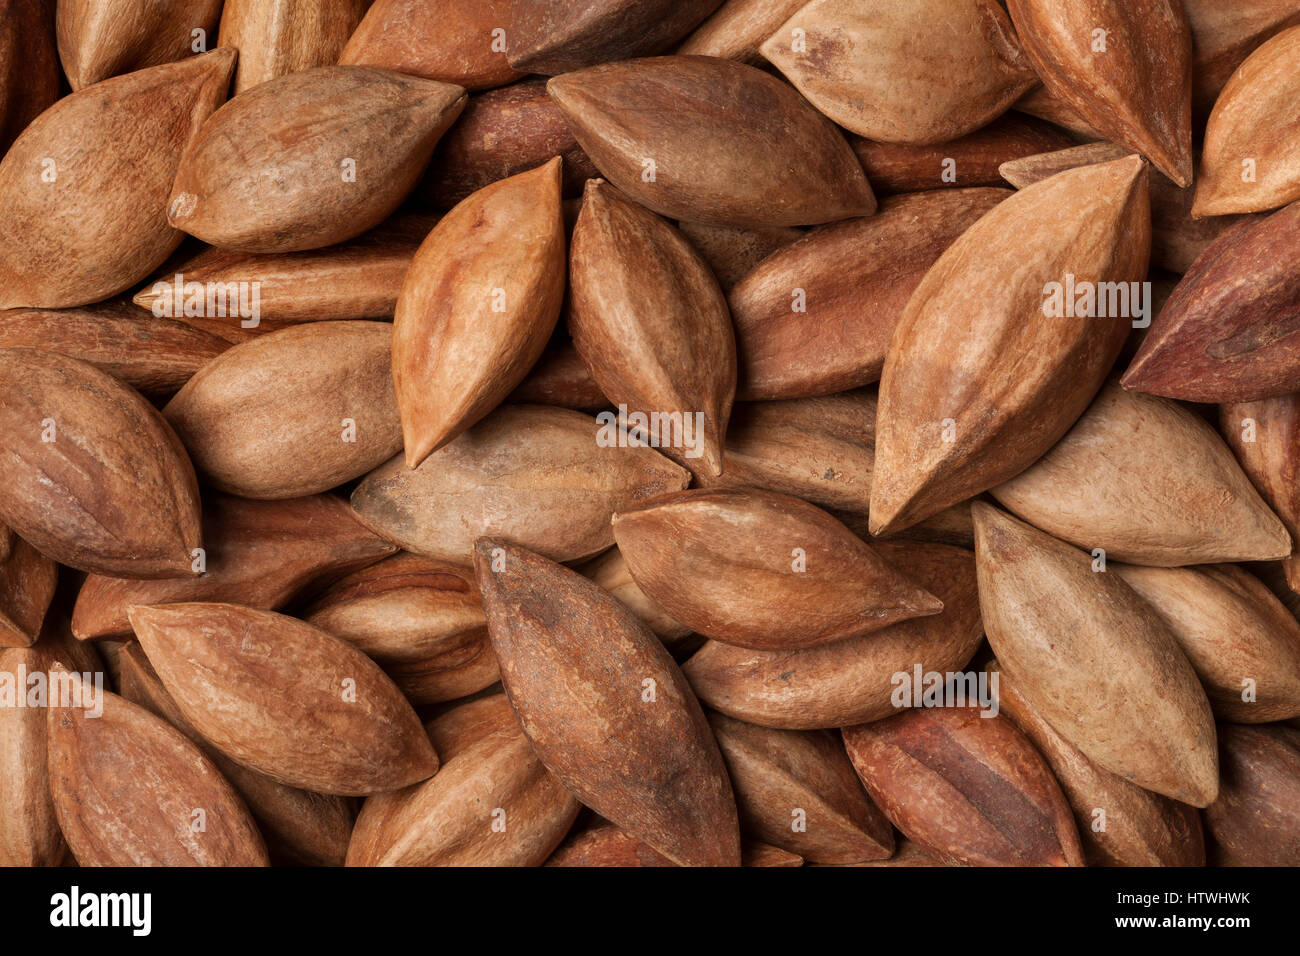 Unshelled pili nuts from the Philippines full frame Stock Photo